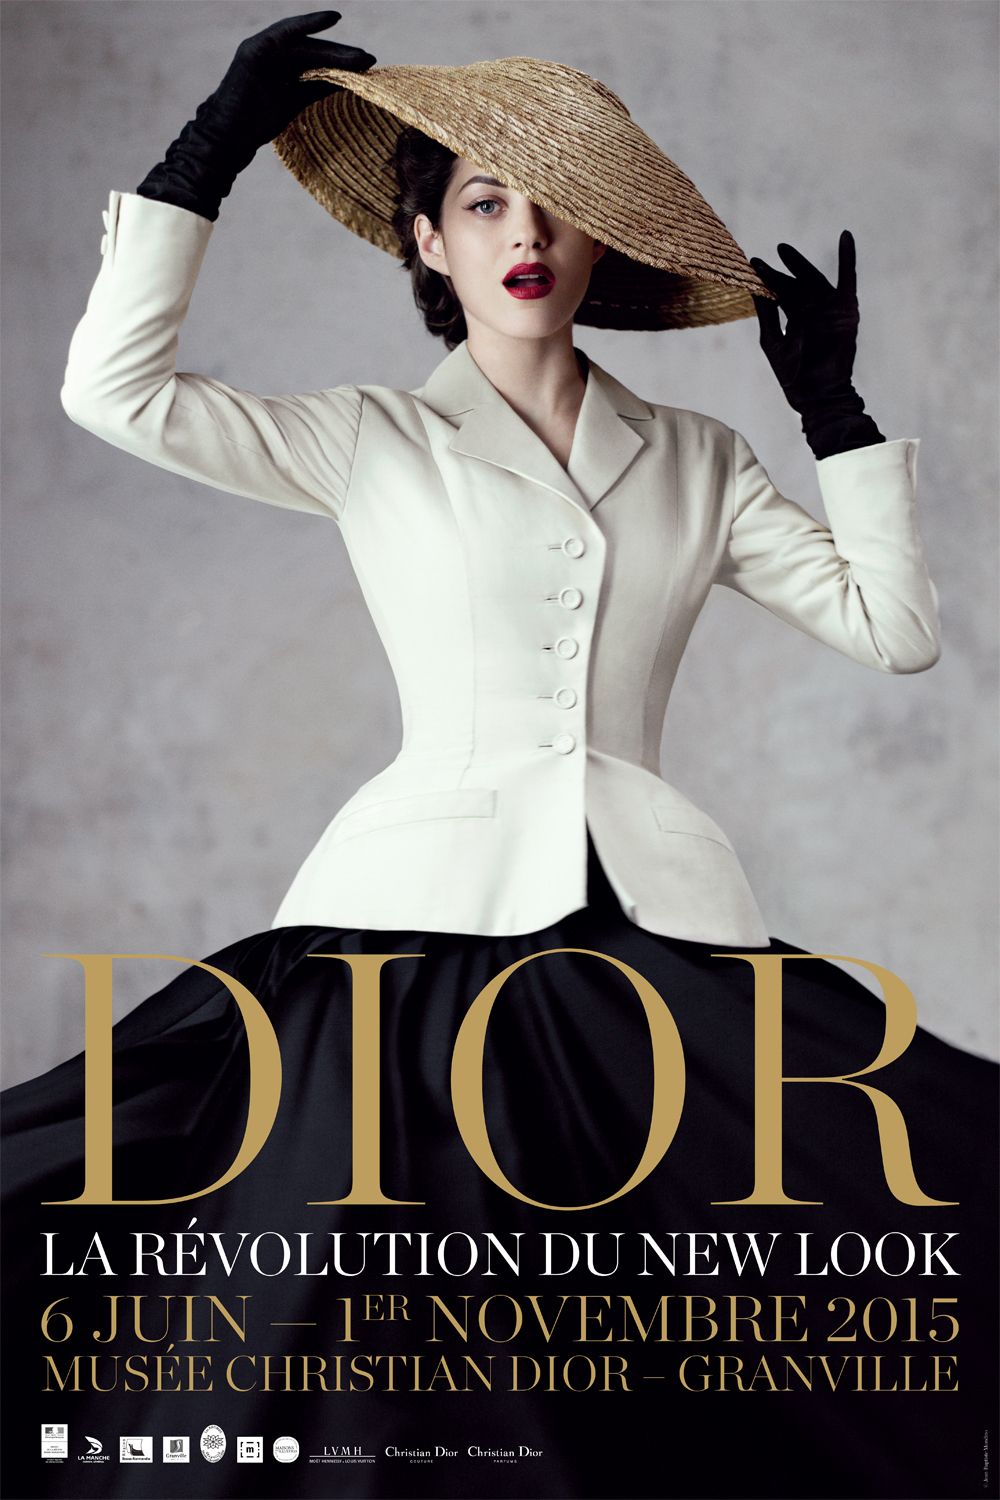 dior the new look revolution